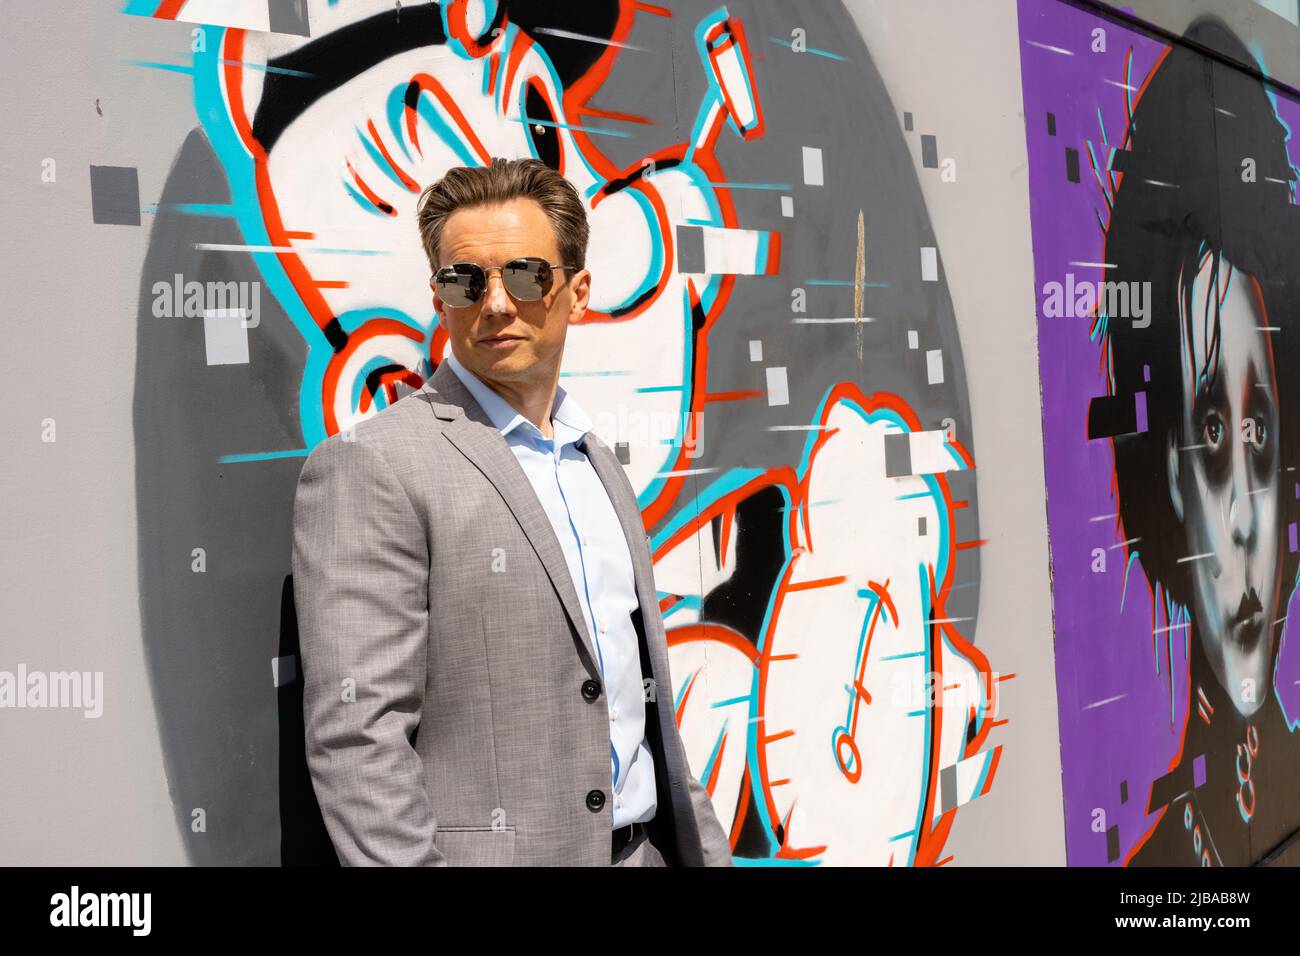 Ipswich Suffolk UK May 27 2022: A handsome businessman in a grey suit in front of some urban artwork Stock Photo